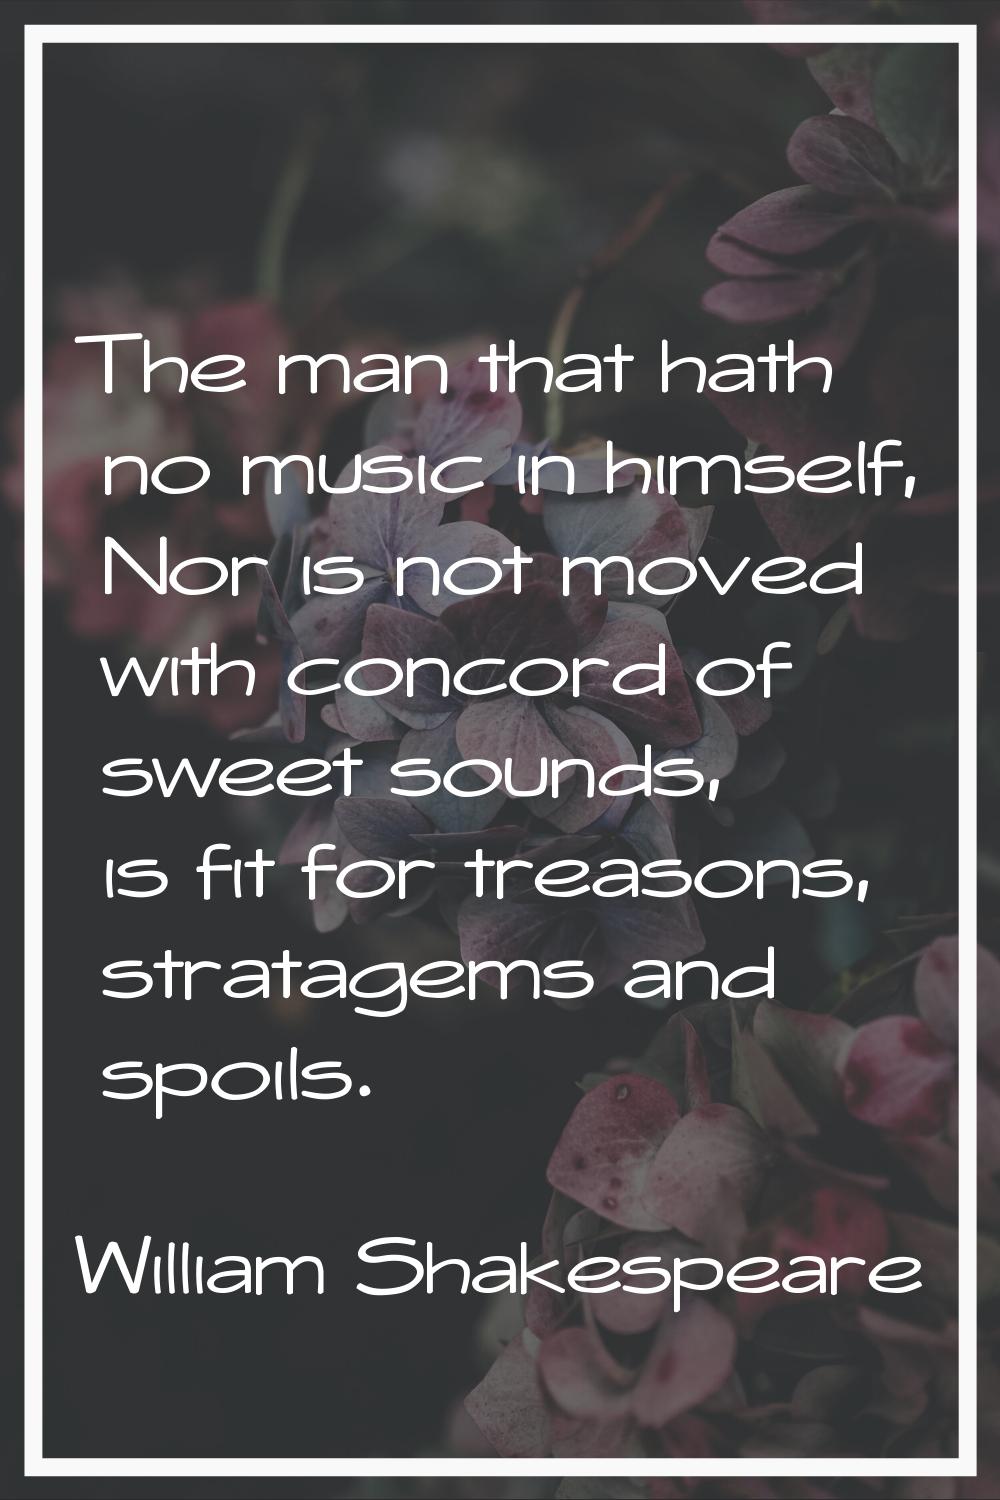 The man that hath no music in himself, Nor is not moved with concord of sweet sounds, is fit for tr